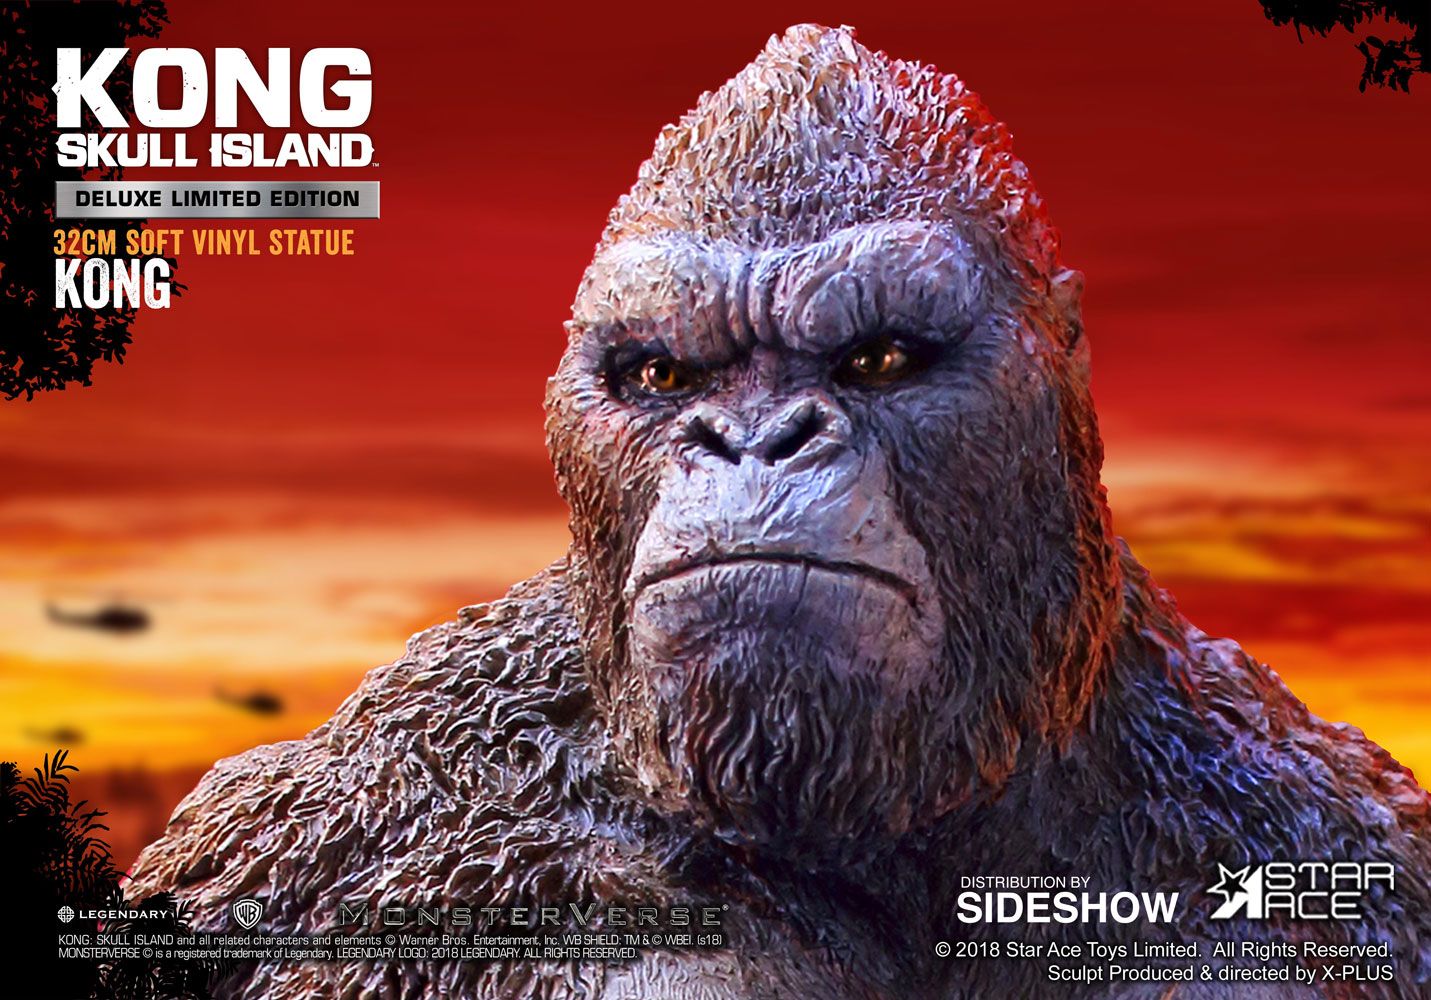 Sideshow King Kong Skull Island  2.0 Deluxe Edition Statue by Star Ace Toys Sideshow RARE 